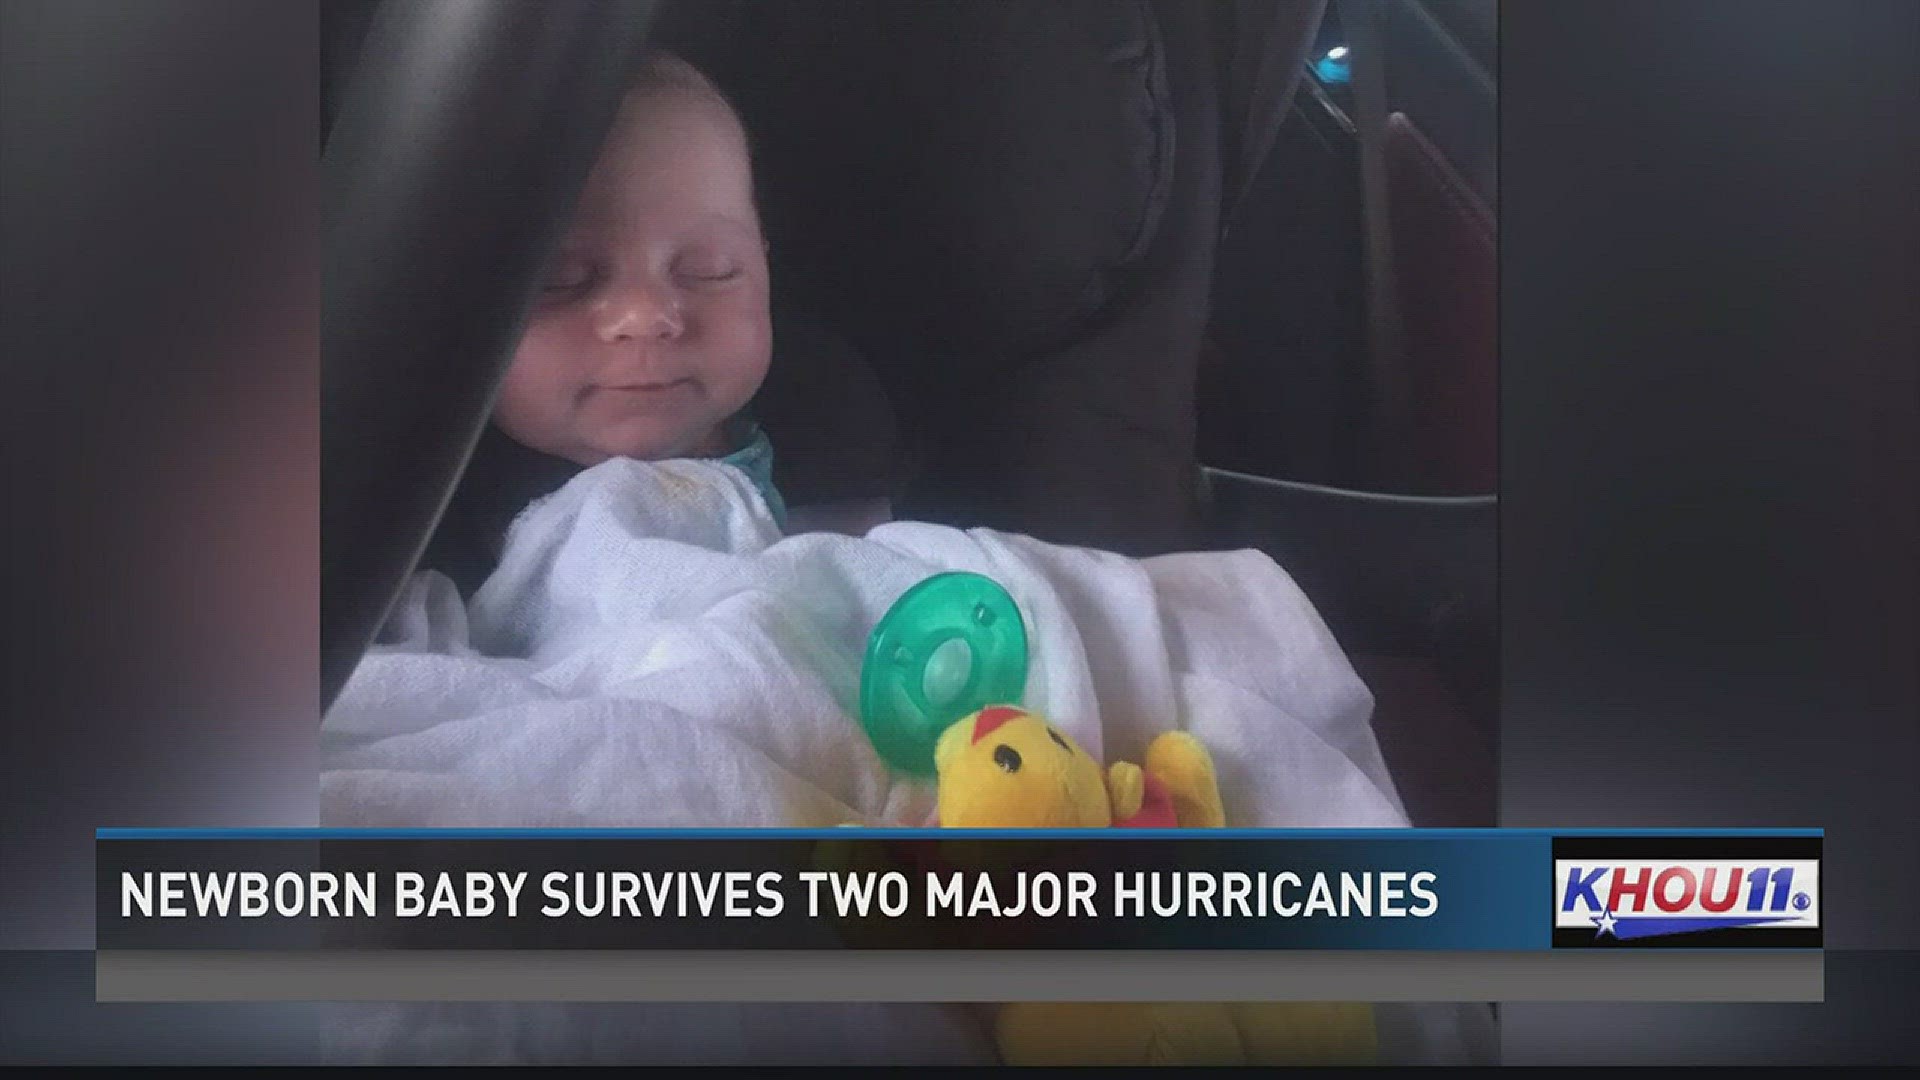 A couple fled Texas for Florida with their newborn, who has now survived two major hurricanes.